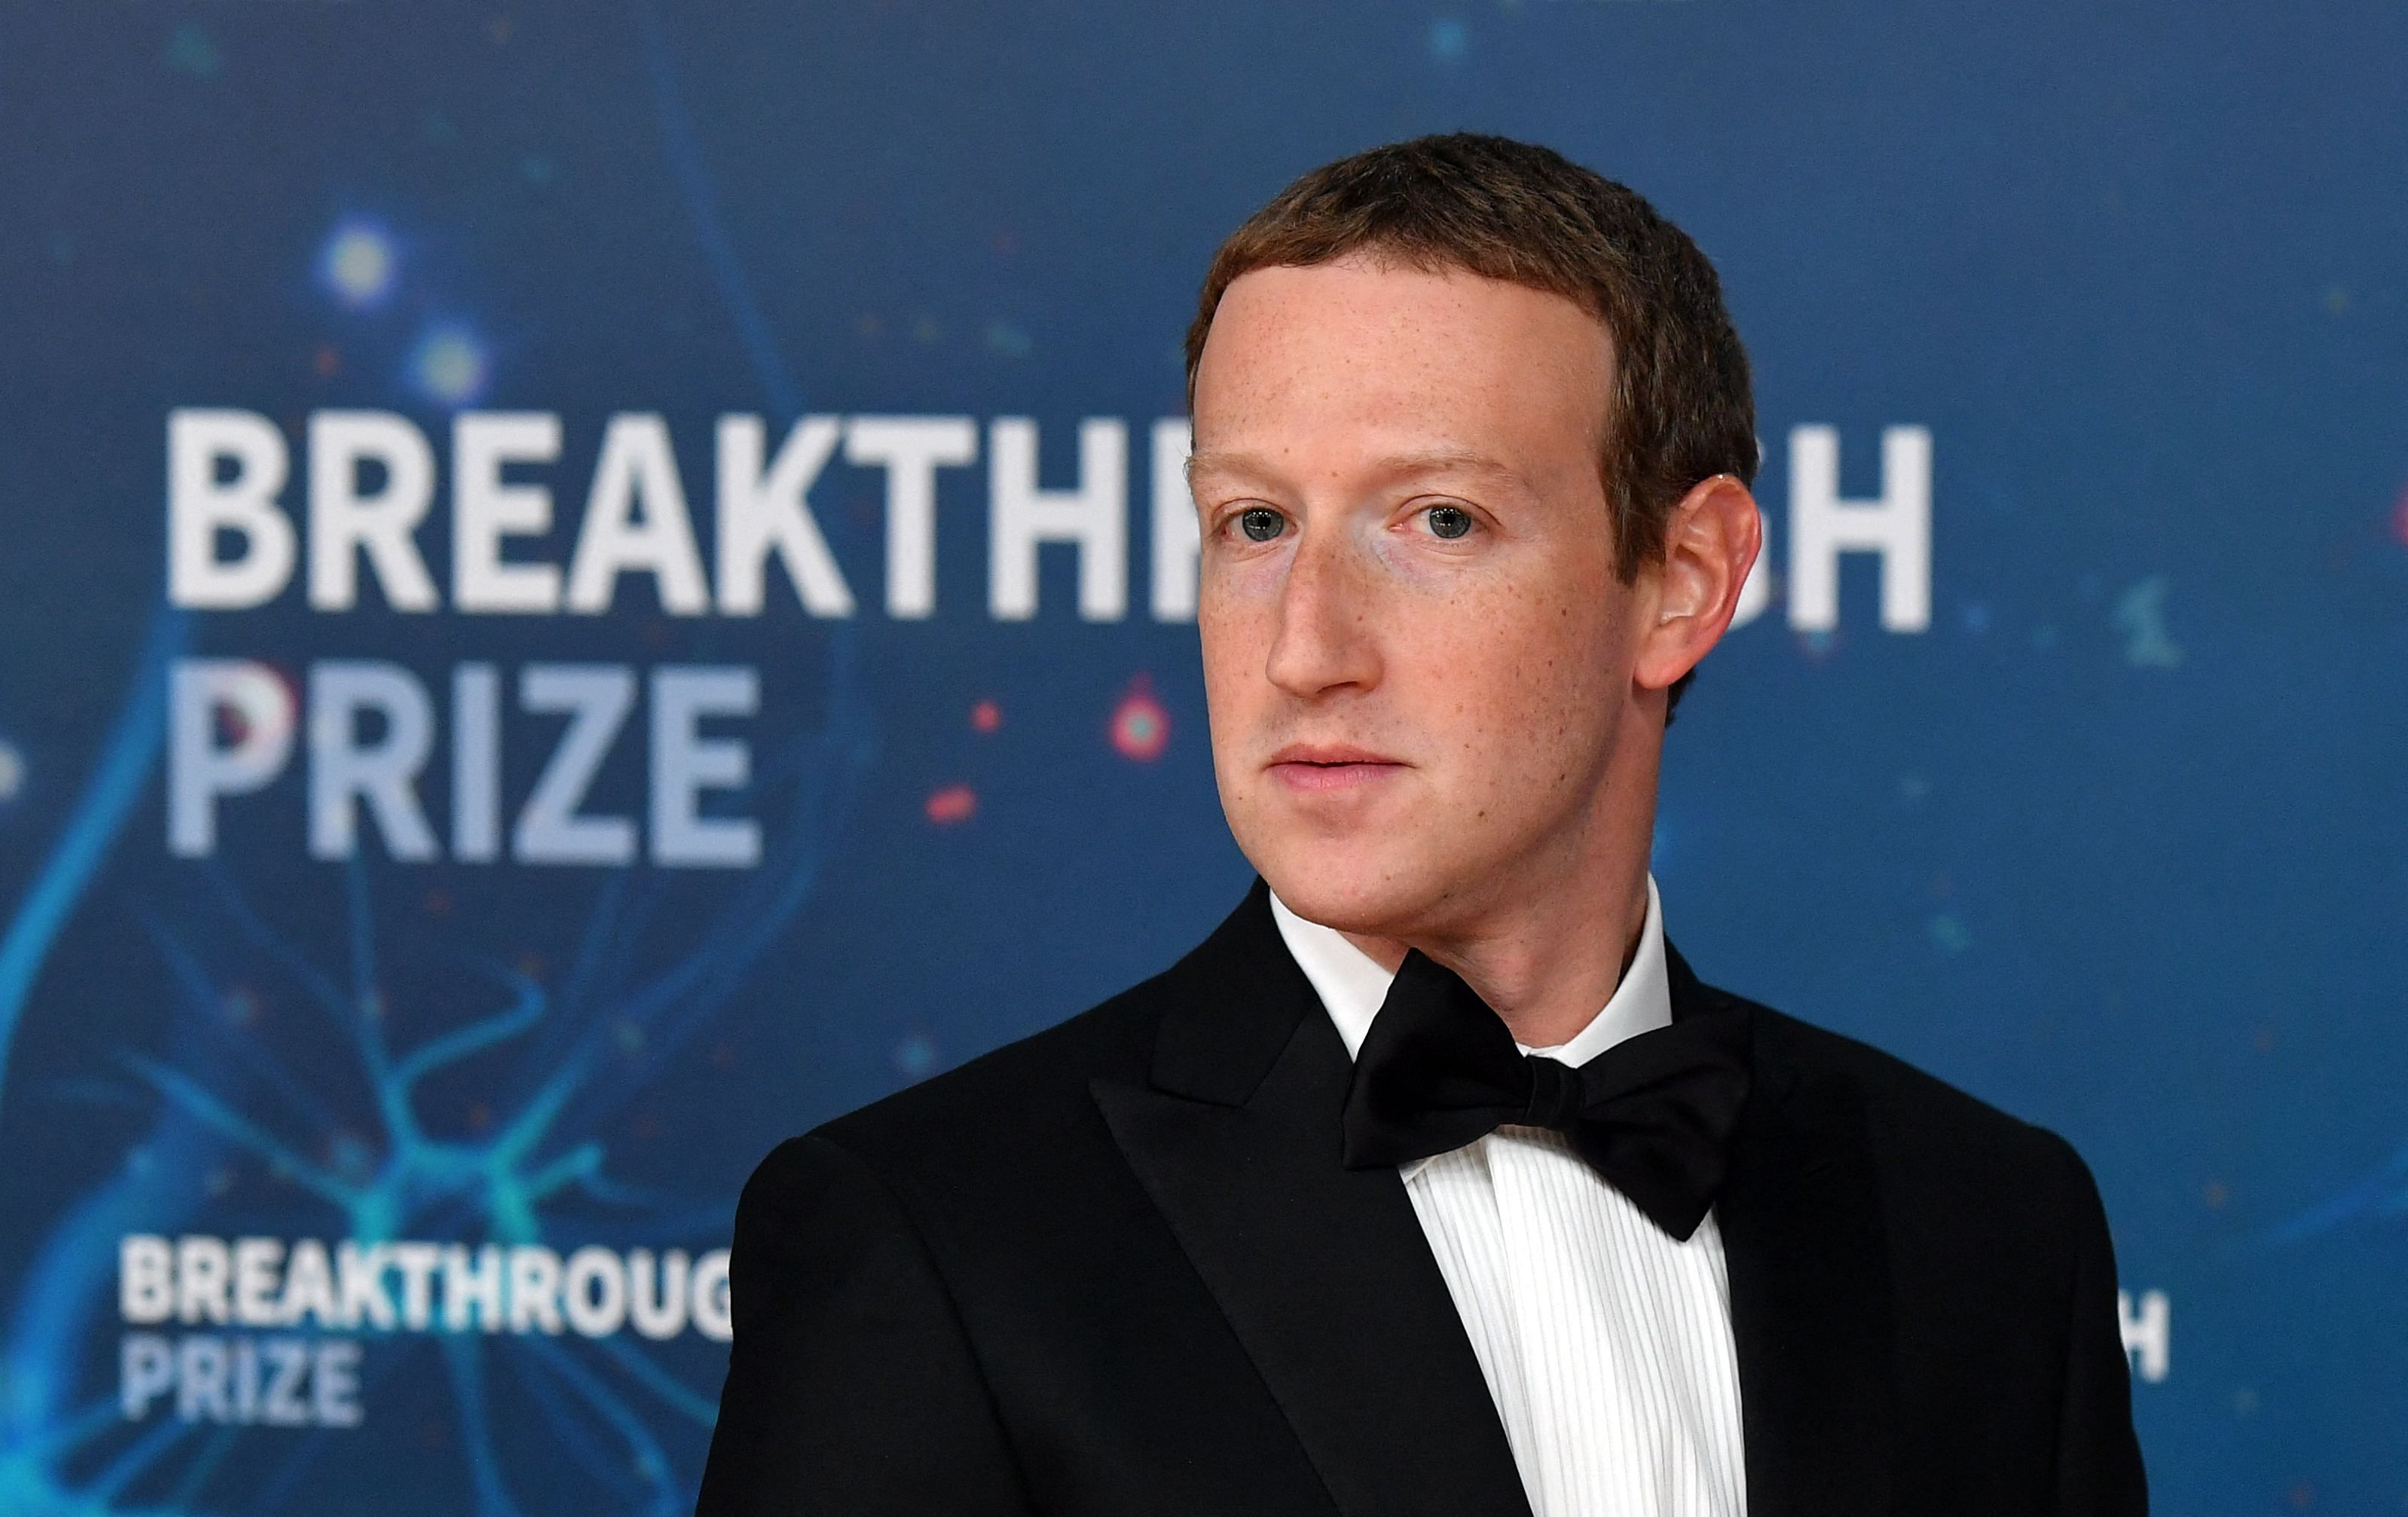 Zuckerberg has been upfront in saying that Meta’s metaverse won’t be fully realized for five years or more. Credit: AFP Photo